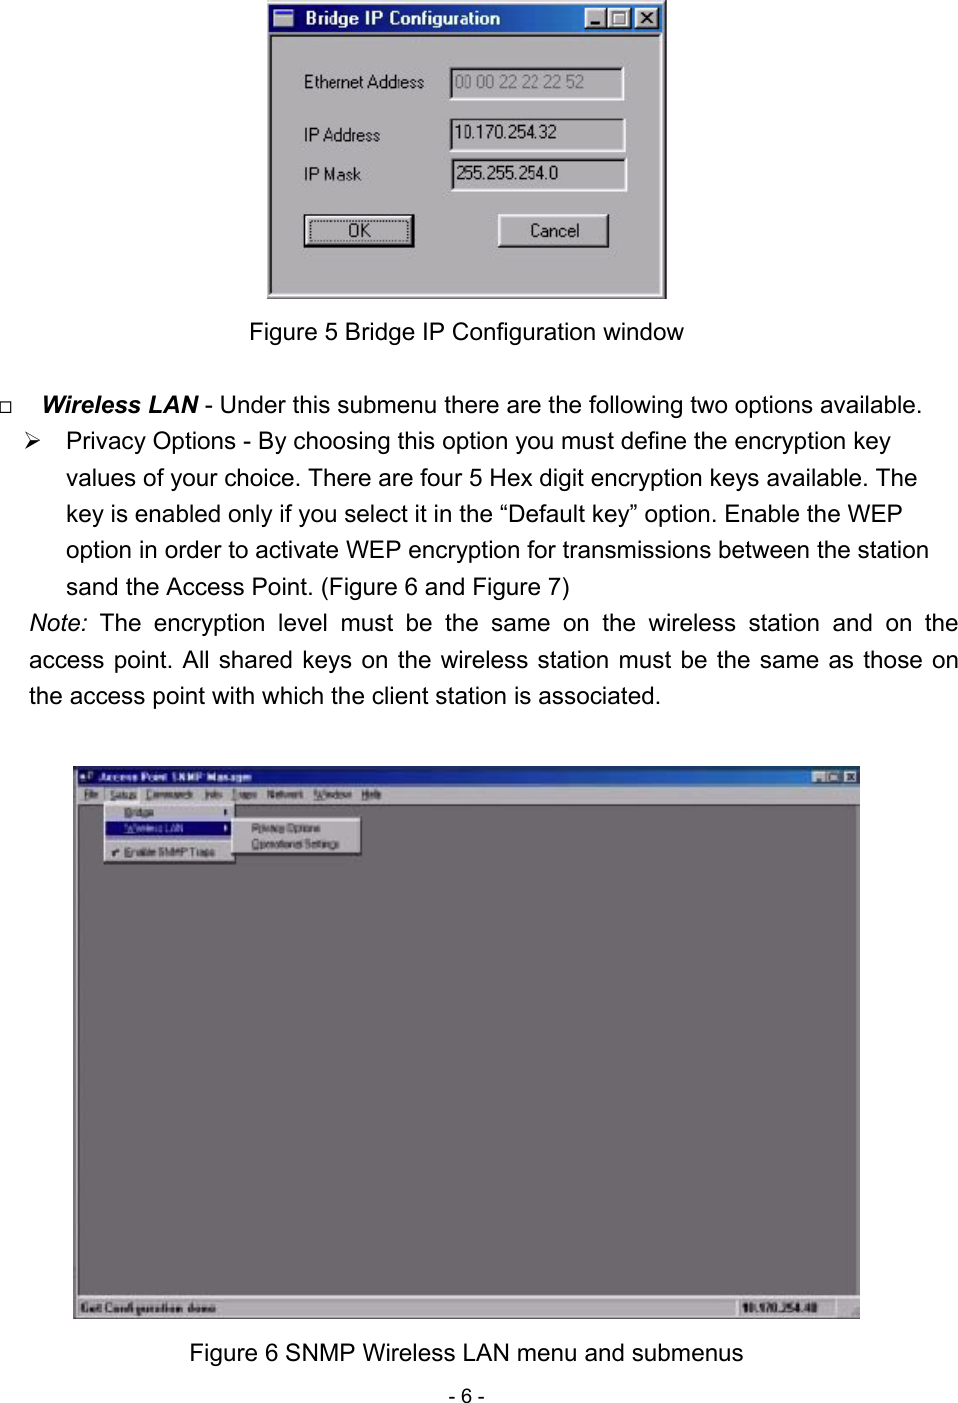 - 6 -   Figure 5 Bridge IP Configuration window    Wireless LAN - Under this submenu there are the following two options available.  Privacy Options - By choosing this option you must define the encryption key values of your choice. There are four 5 Hex digit encryption keys available. The key is enabled only if you select it in the “Default key” option. Enable the WEP option in order to activate WEP encryption for transmissions between the station sand the Access Point. (Figure 6 and Figure 7) Note:  The encryption level must be the same on the wireless station and on the access point. All shared keys on the wireless station must be the same as those on the access point with which the client station is associated.   Figure 6 SNMP Wireless LAN menu and submenus 